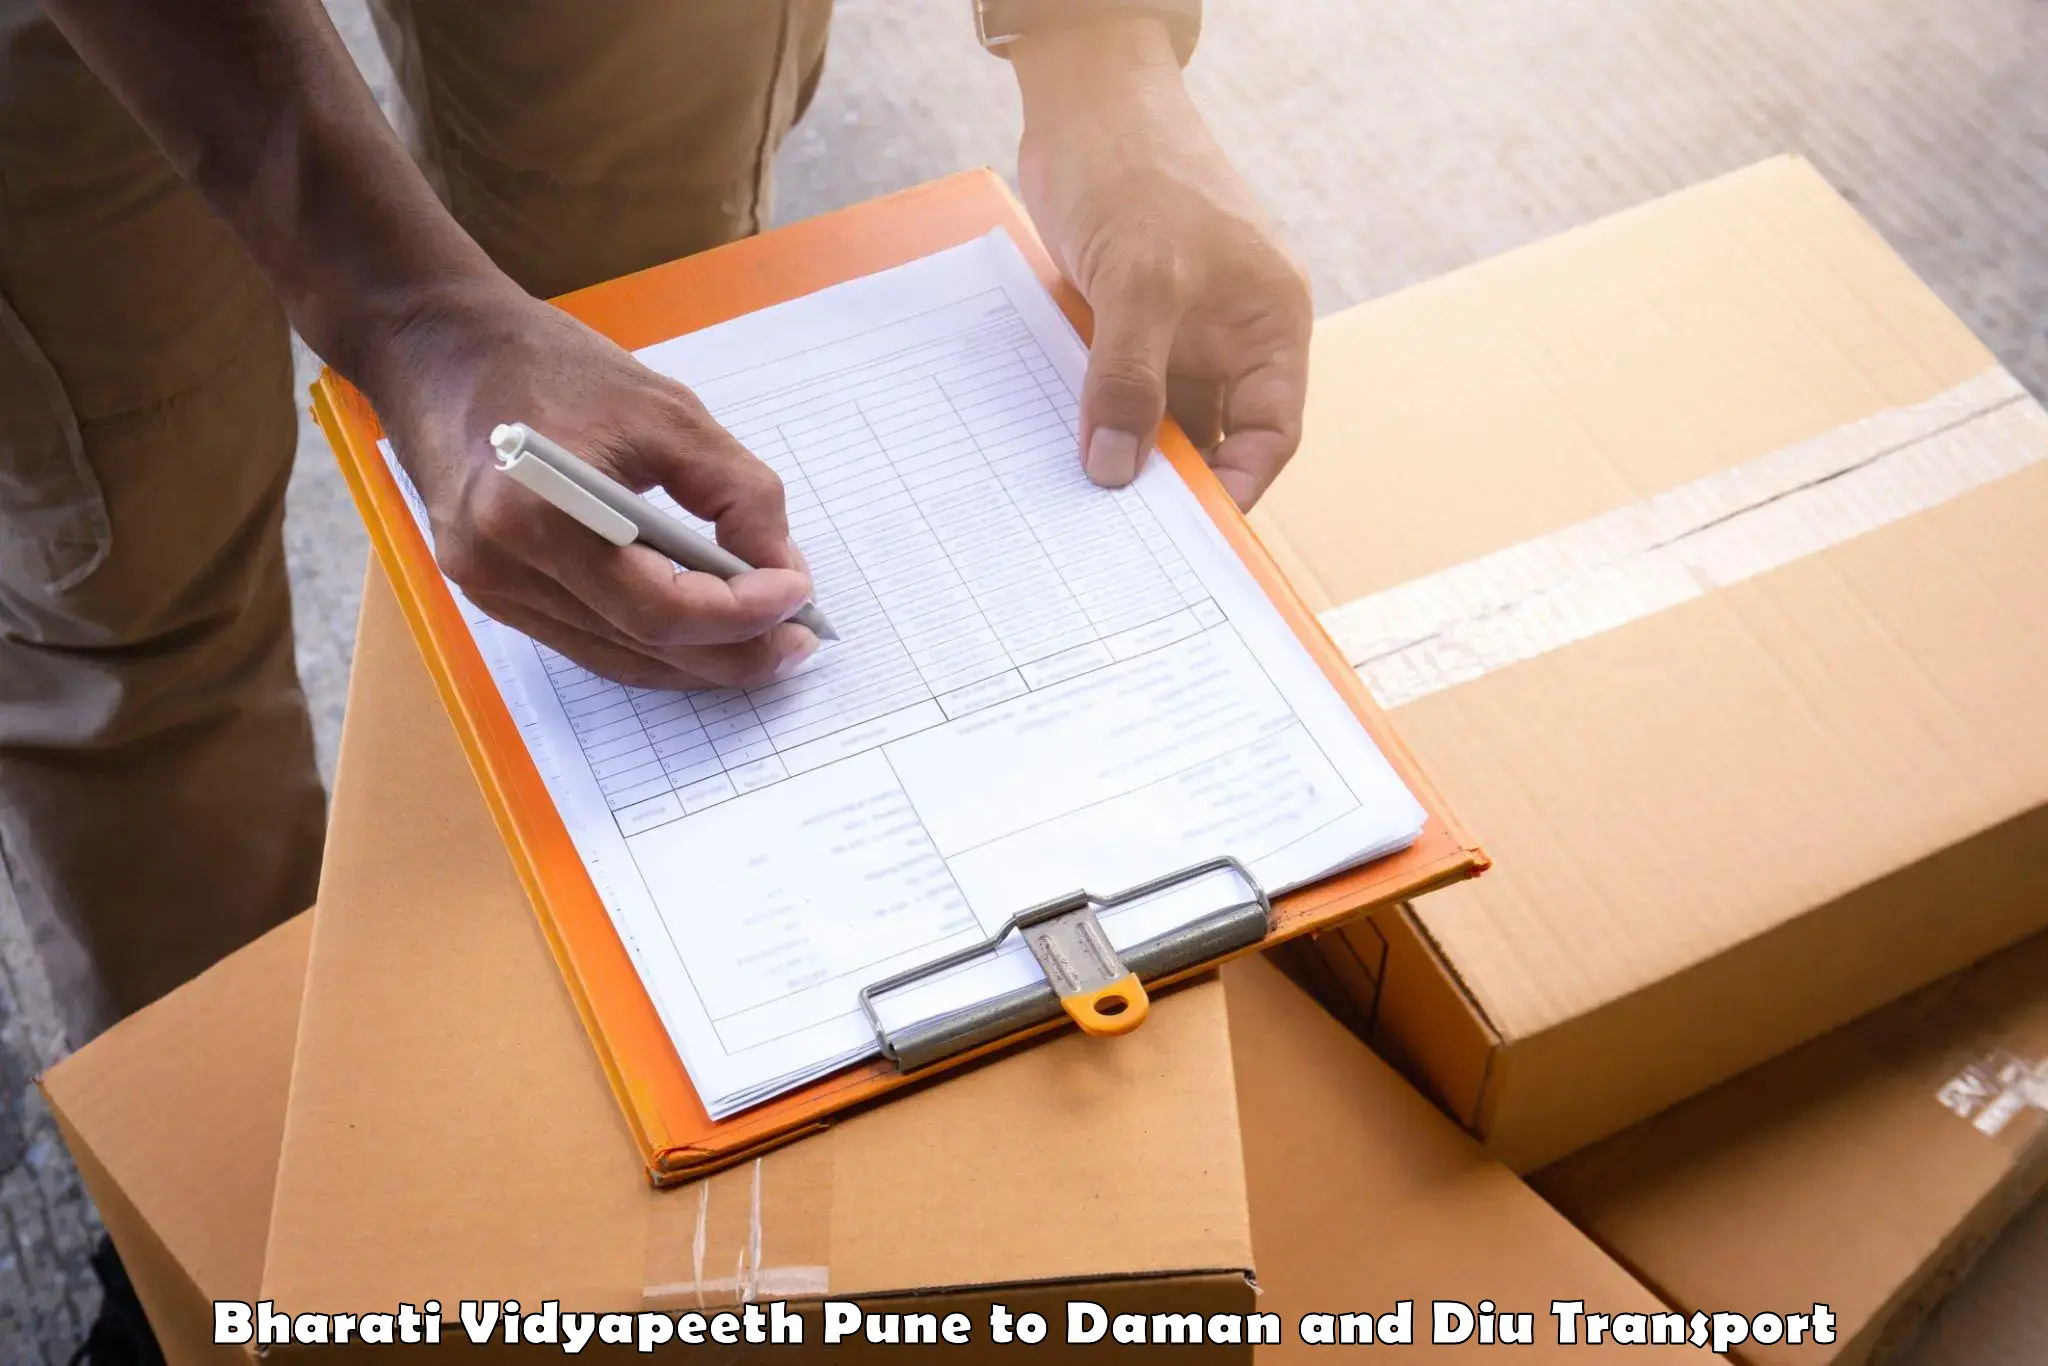 Package delivery services Bharati Vidyapeeth Pune to Daman and Diu